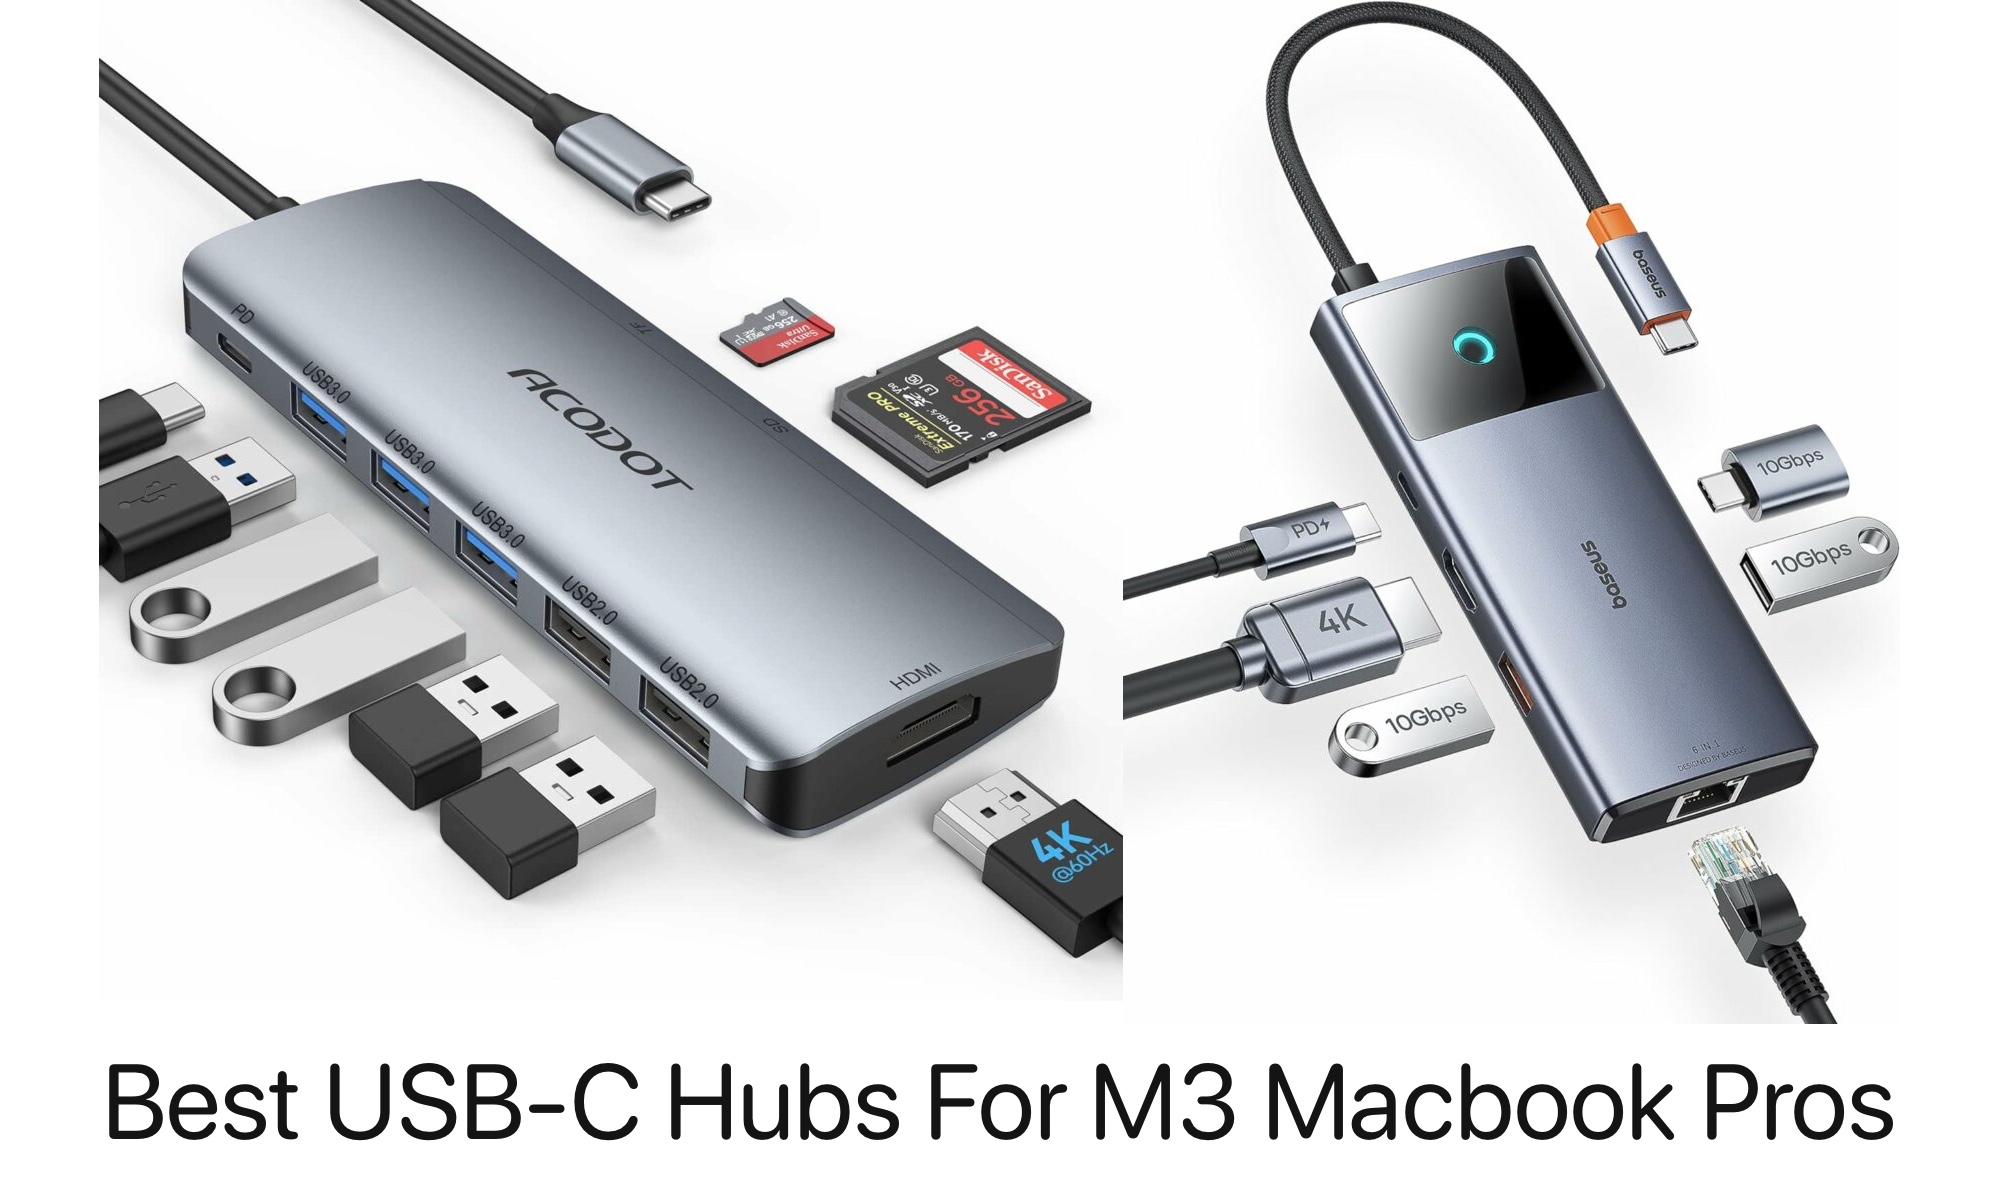 Best USB-C accessories to pair with your new smartphone, tablet or